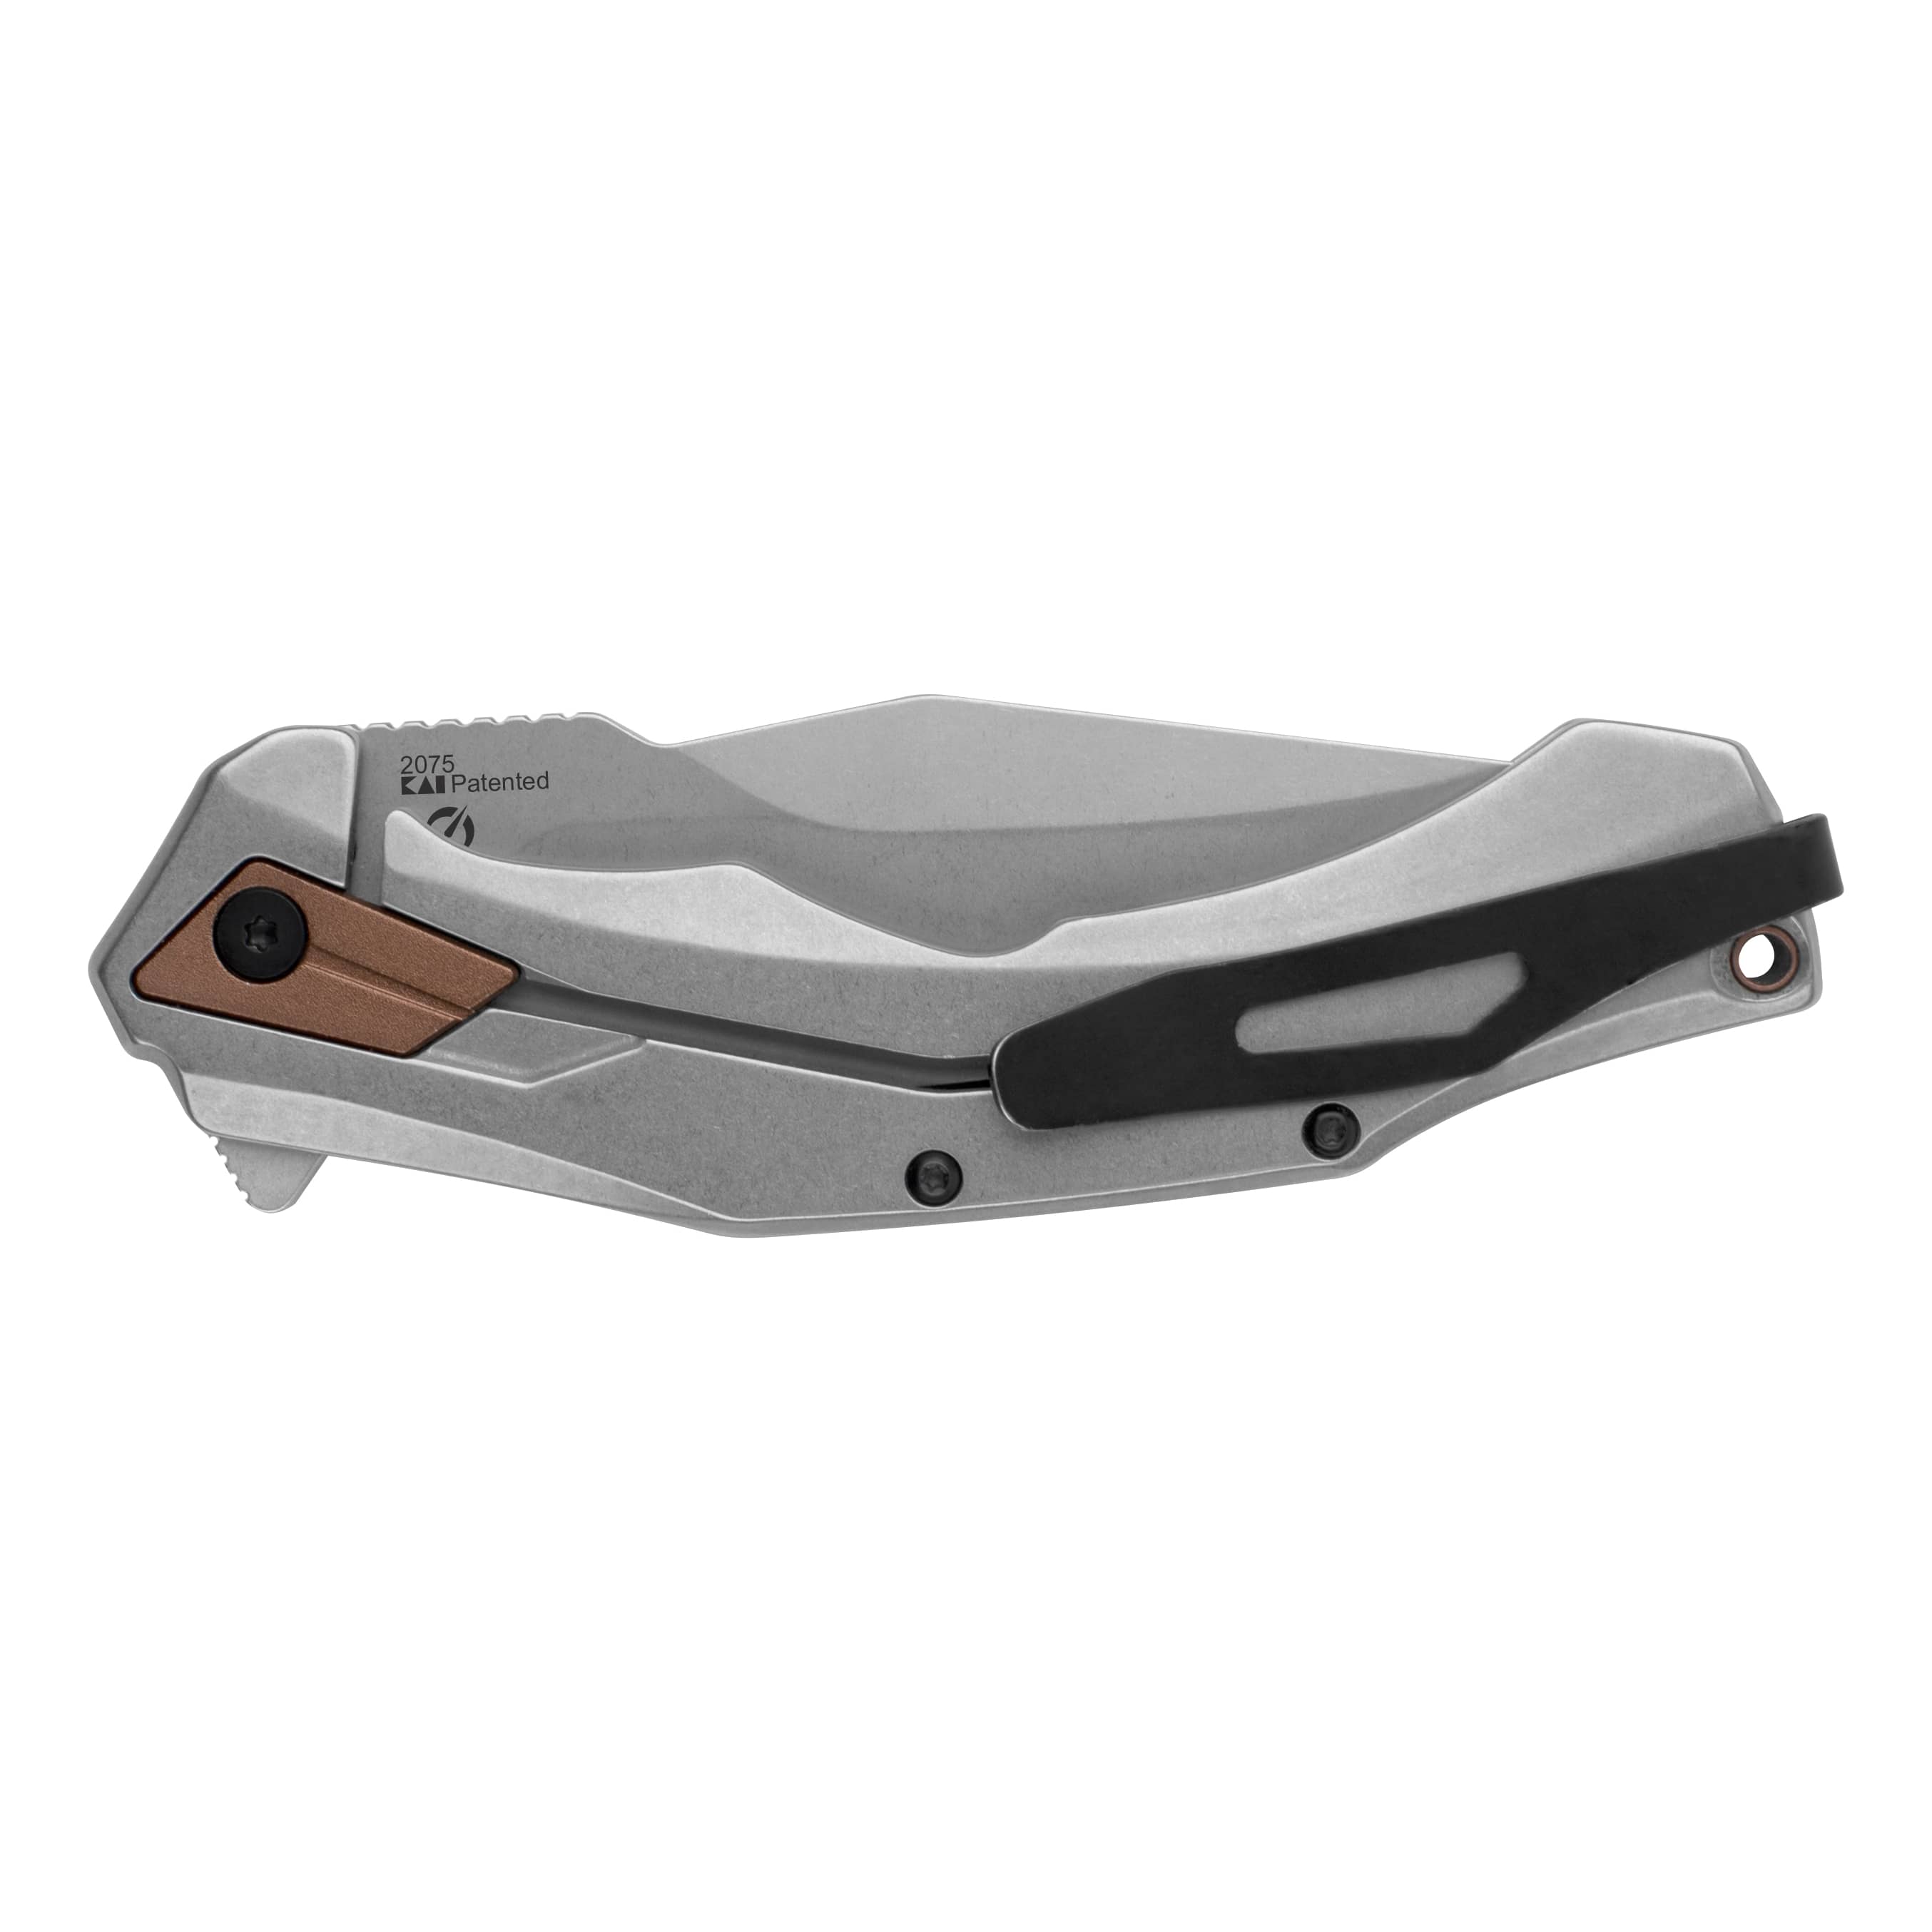 Kershaw® Payout 2075 3.5" Assisted Open Knife - closed